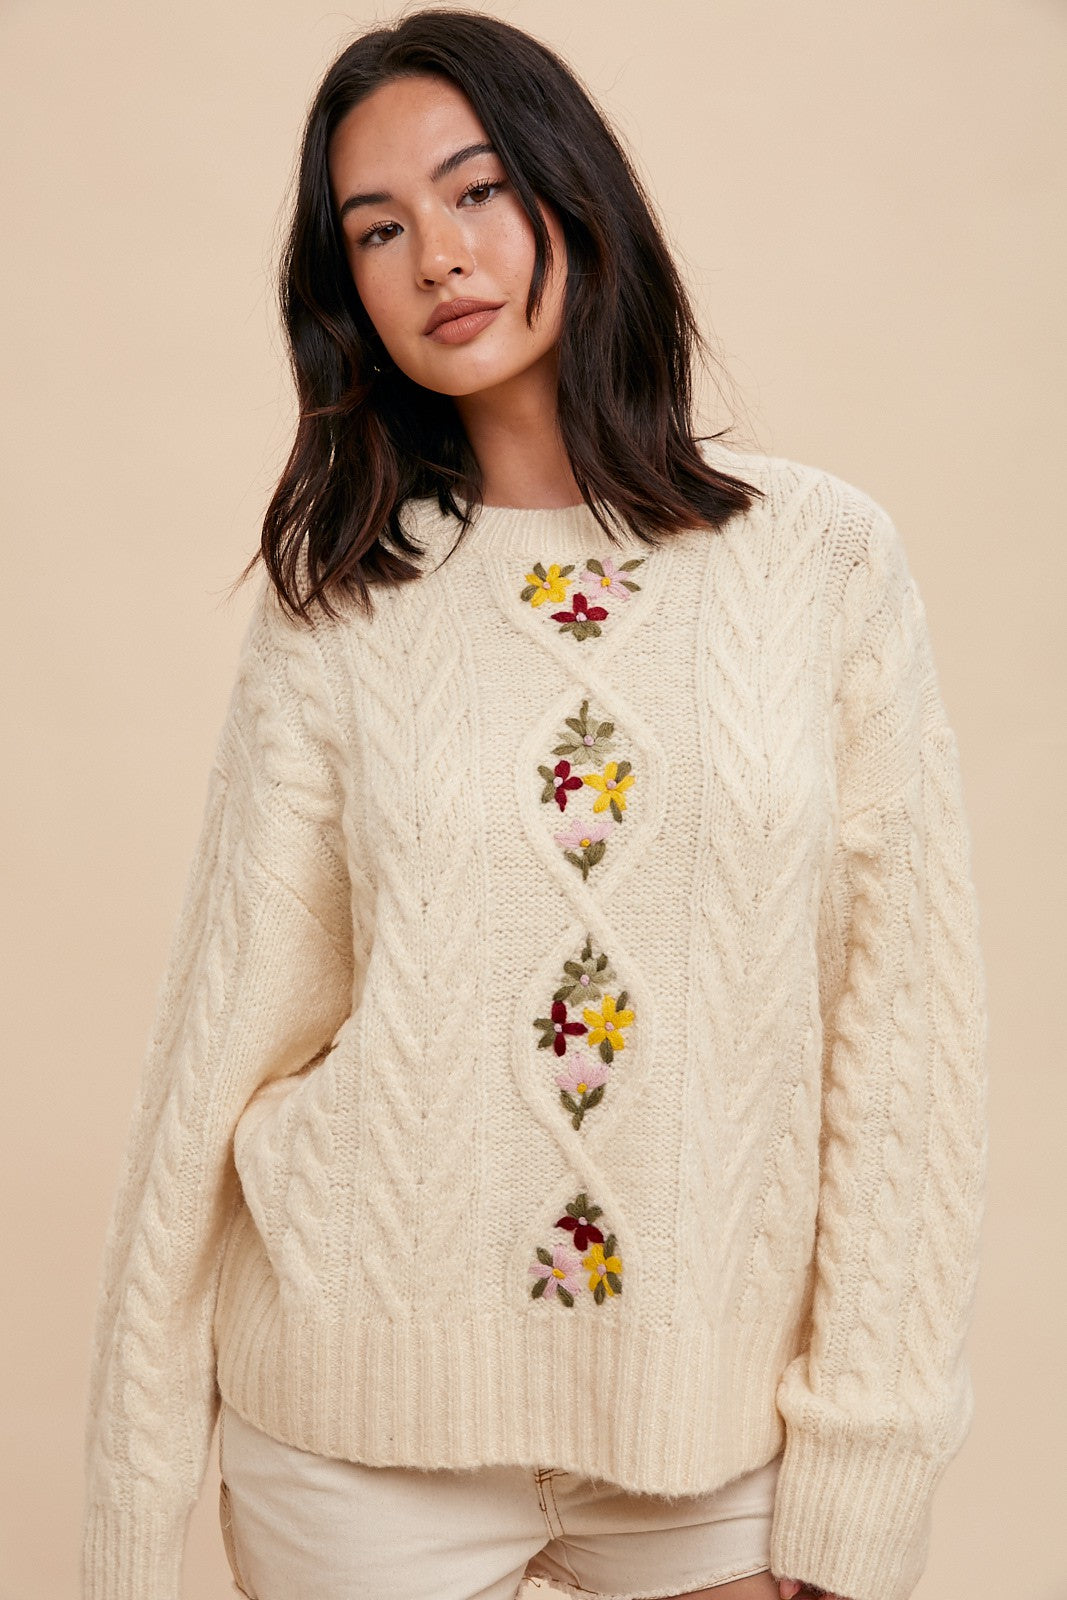 Floral Cable Knit Sweater